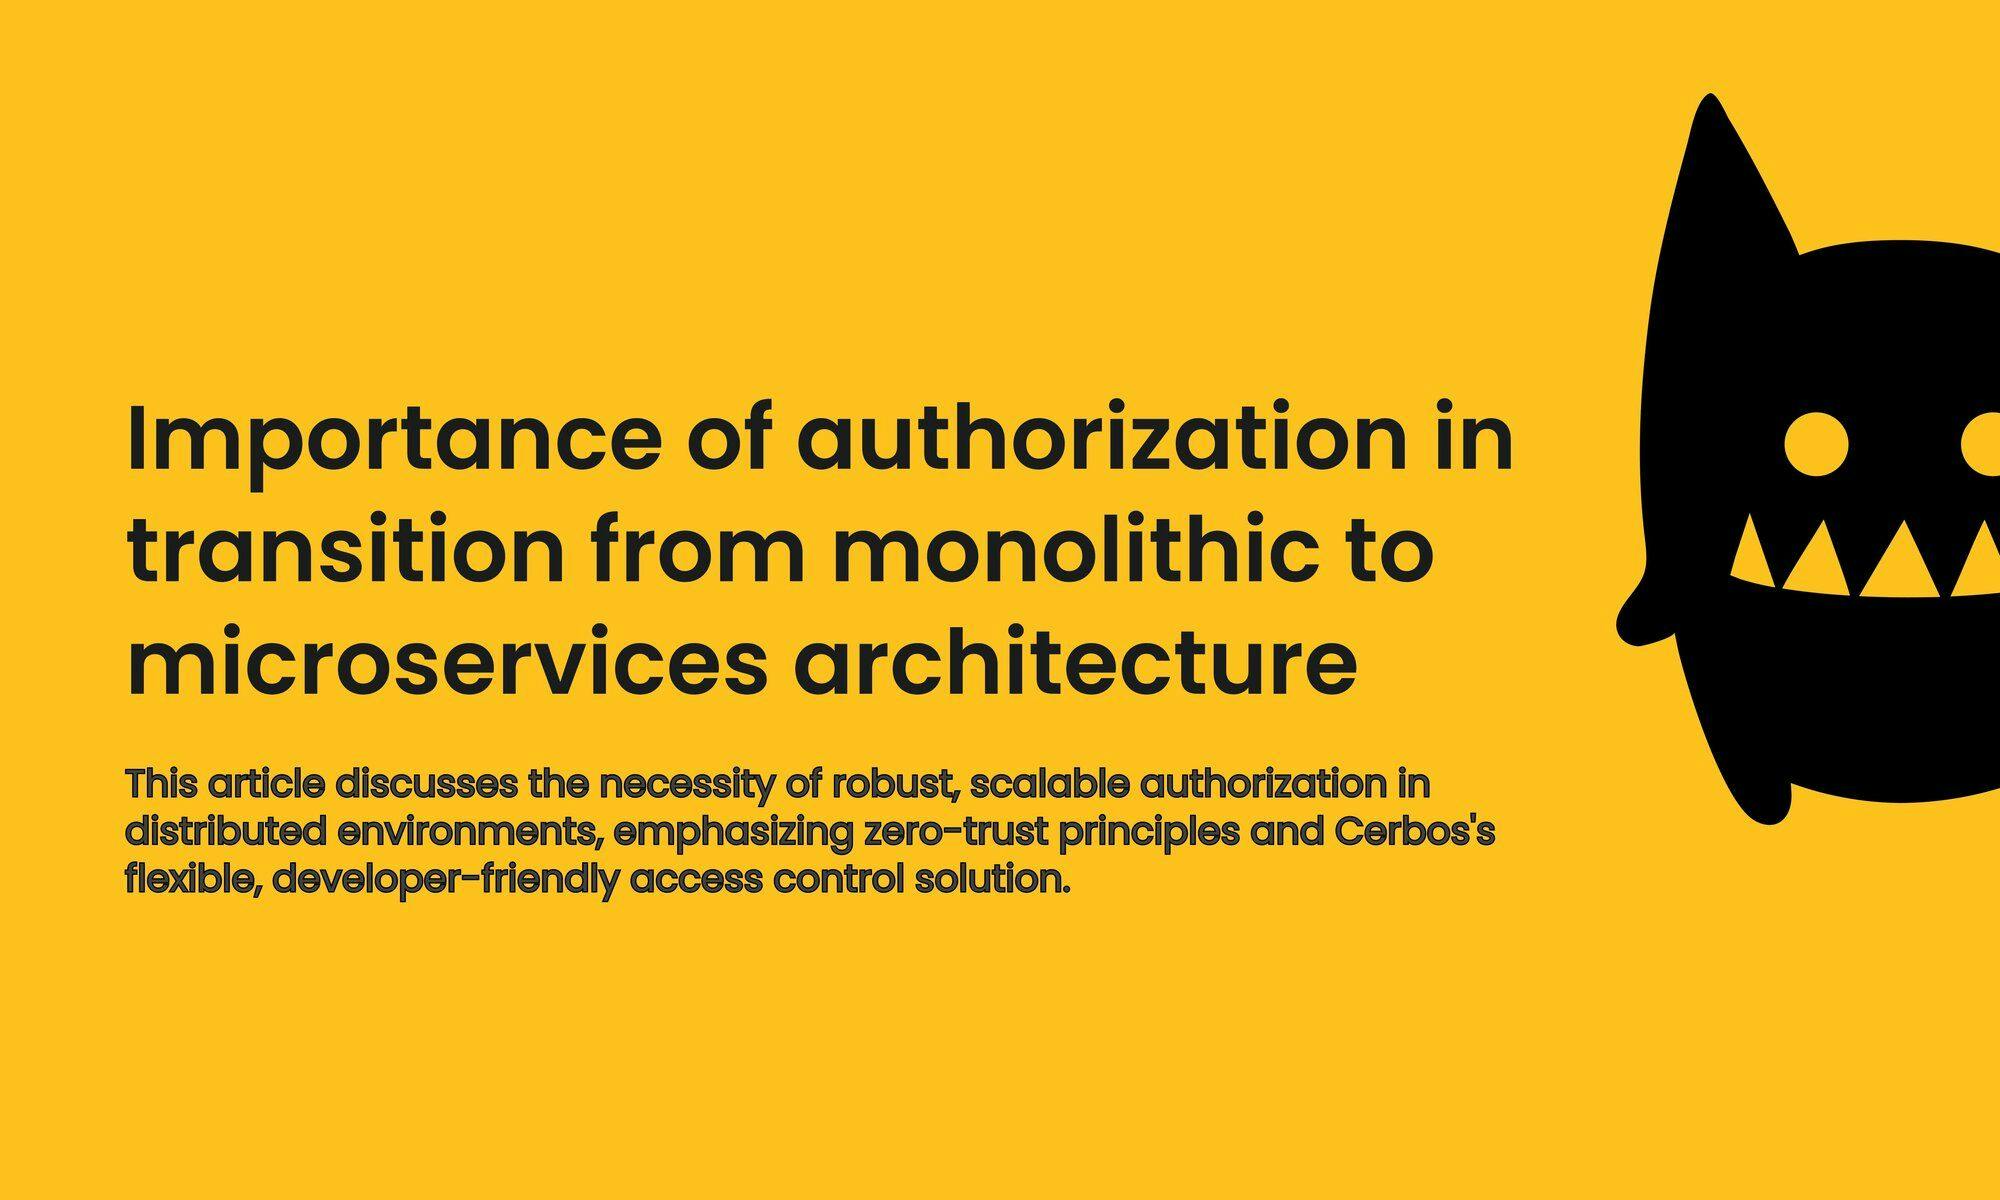 Importance of authorization in transition from monolithic to microservices architecture